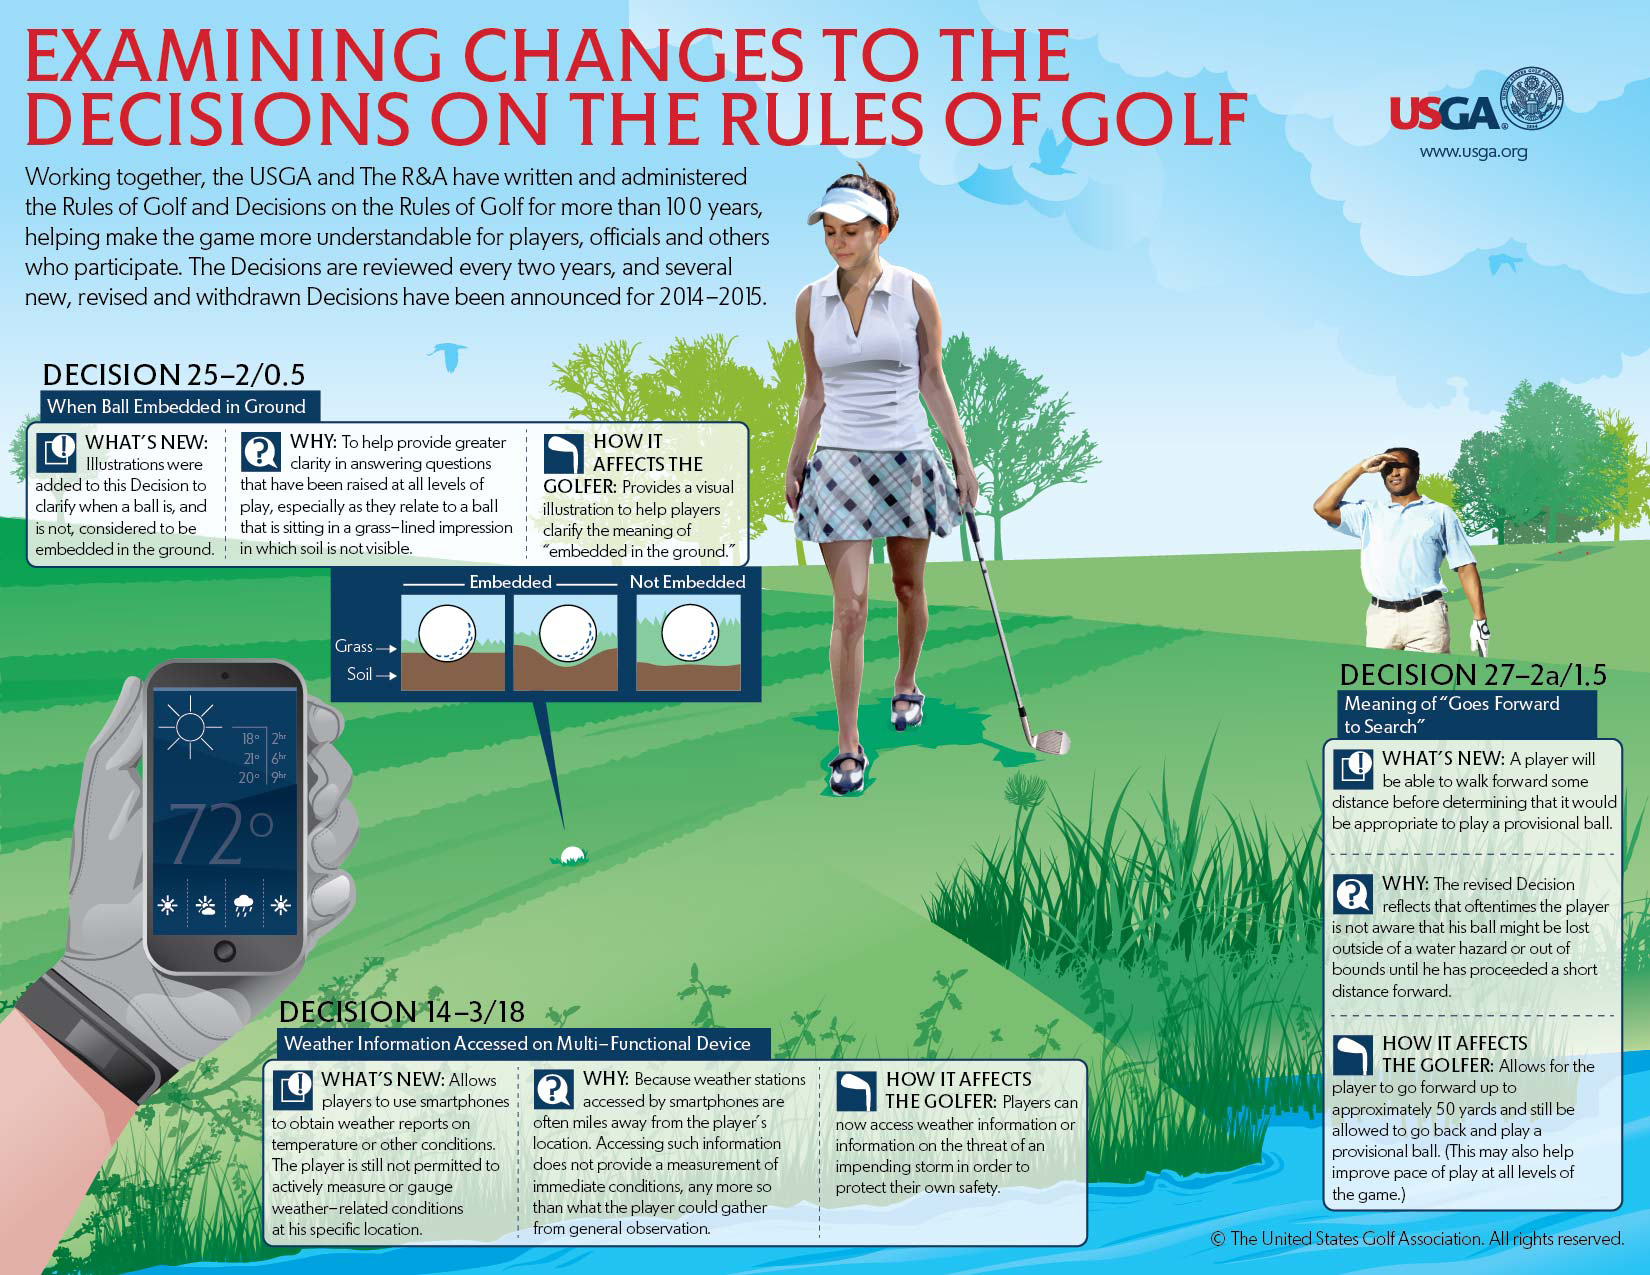 USGA and R&A Announce Changes to "Decisions on the Rules of Golf"